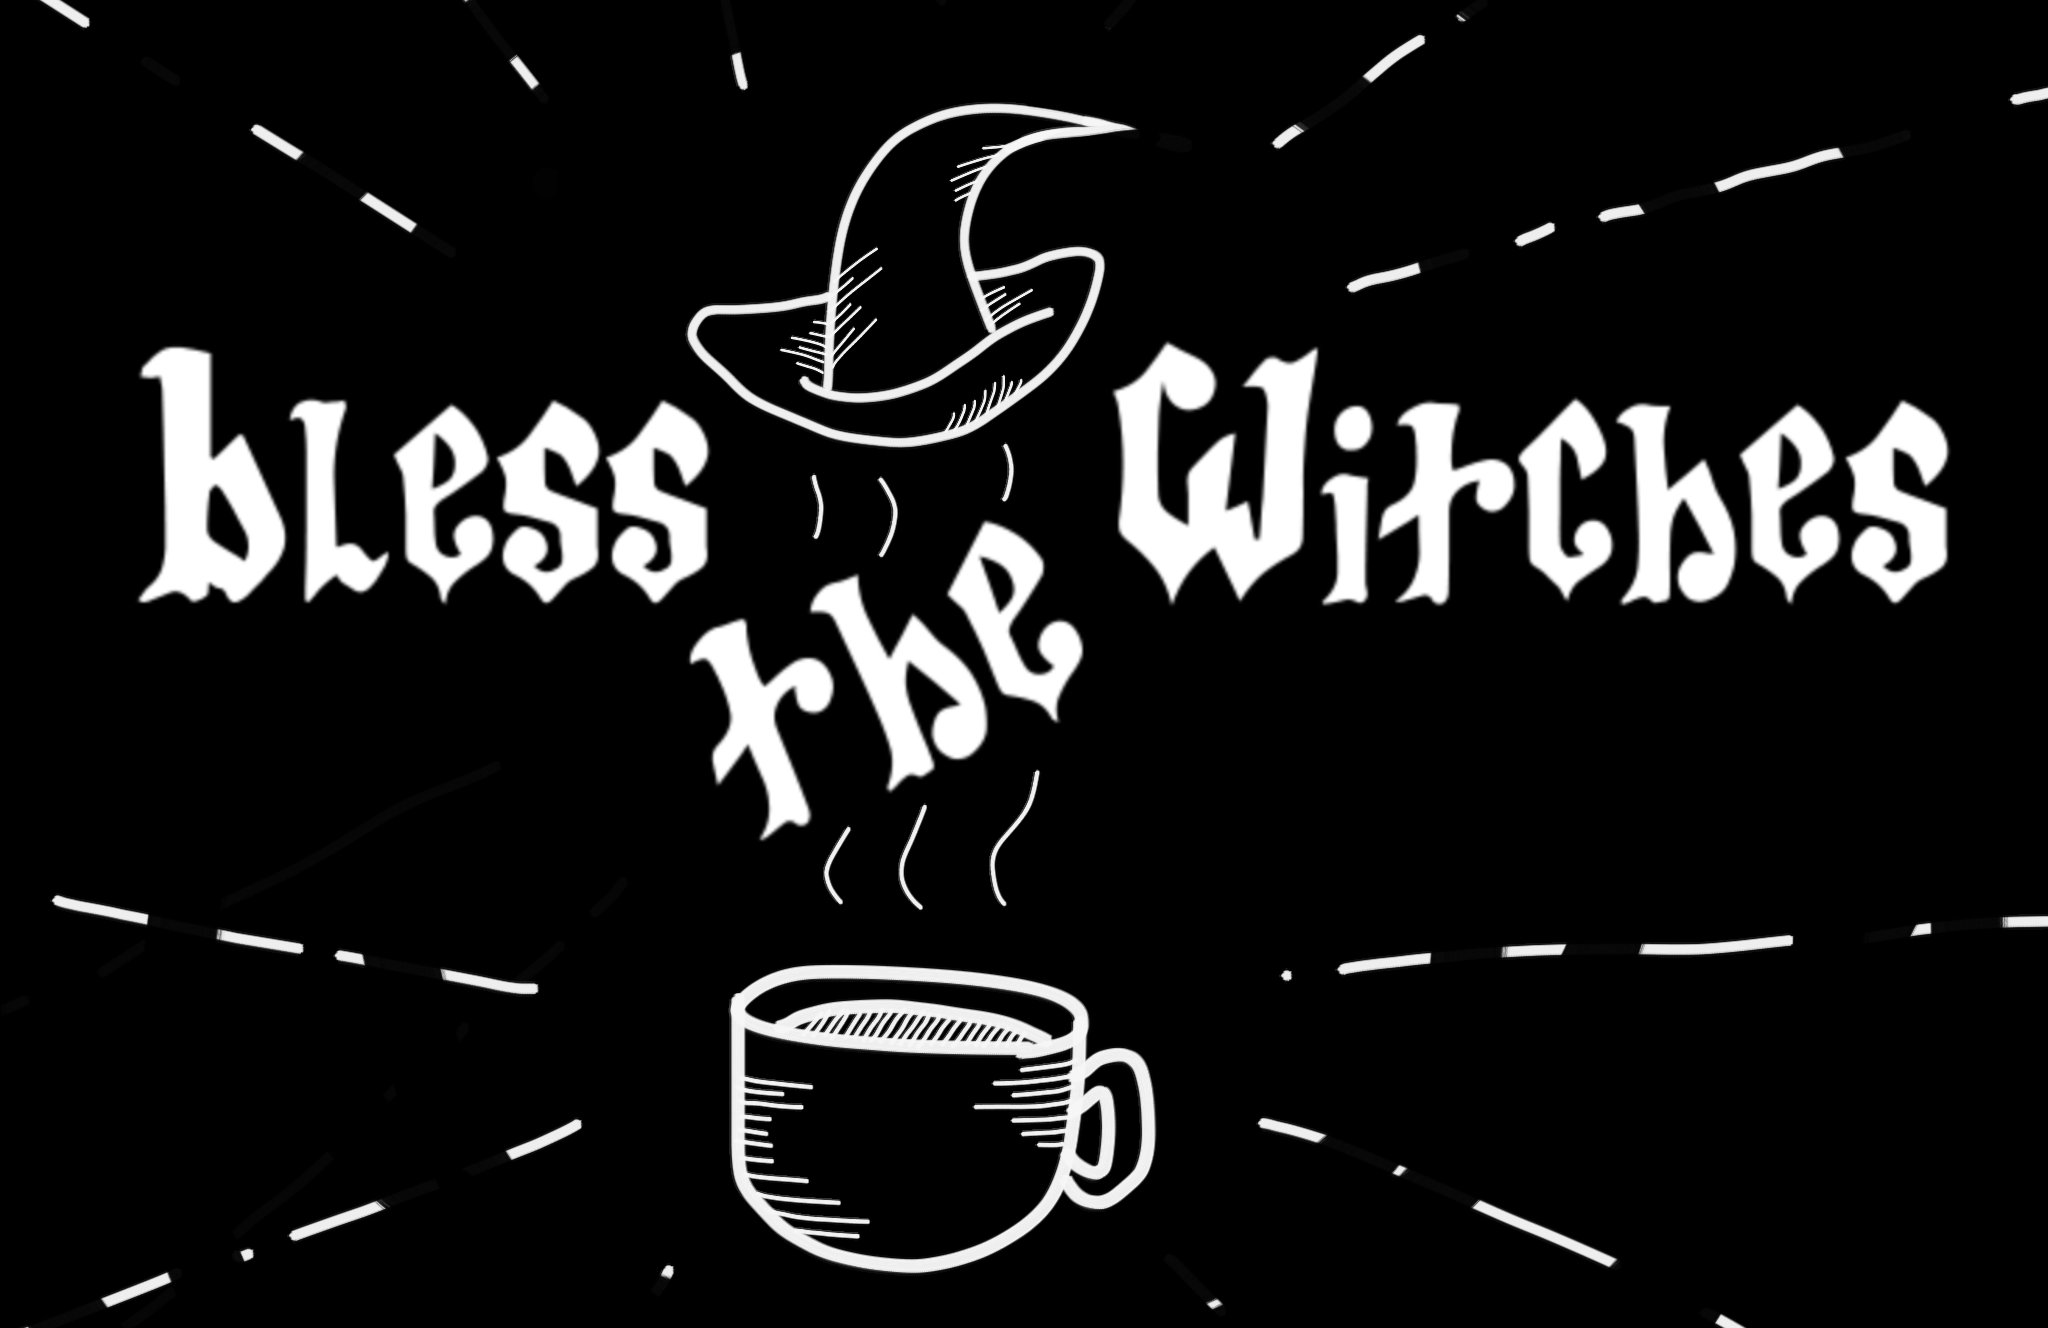 Bless the Witches: Gothic Typeface cover image.